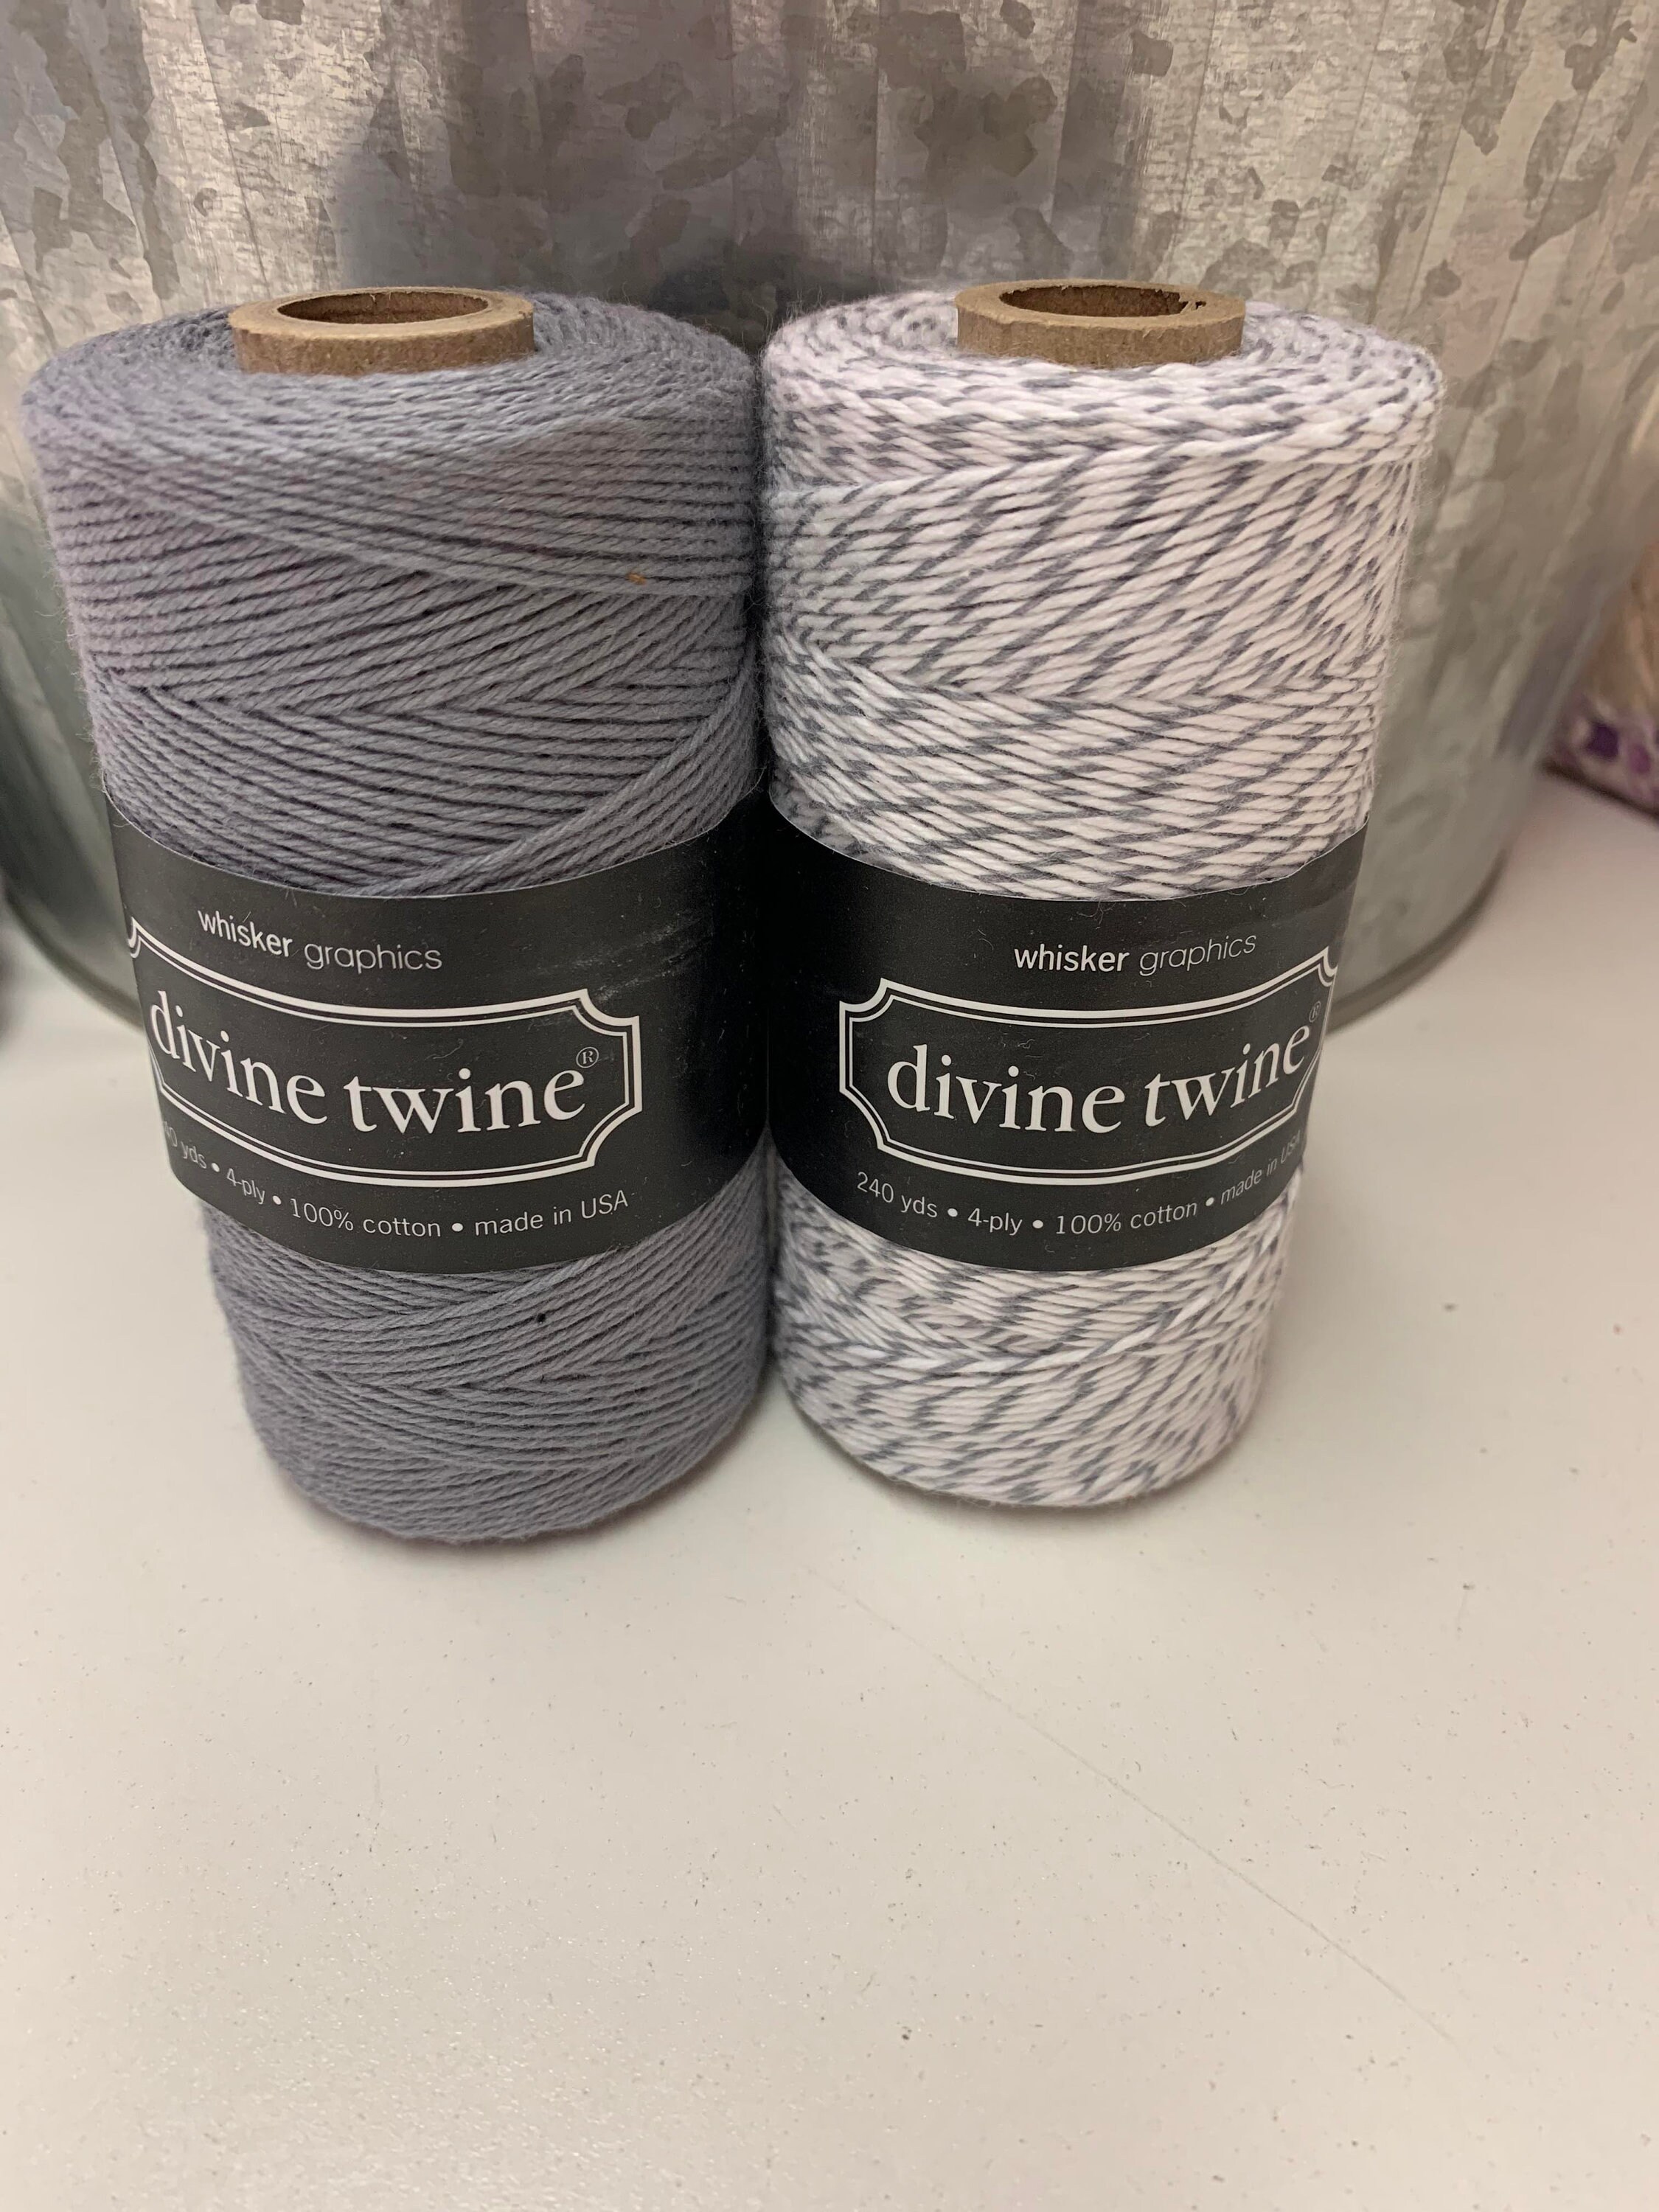 PEACNNG Bakers Twine, Craft Twine, Gardening, Christmas Gift Wrapping,  Packaging Material 